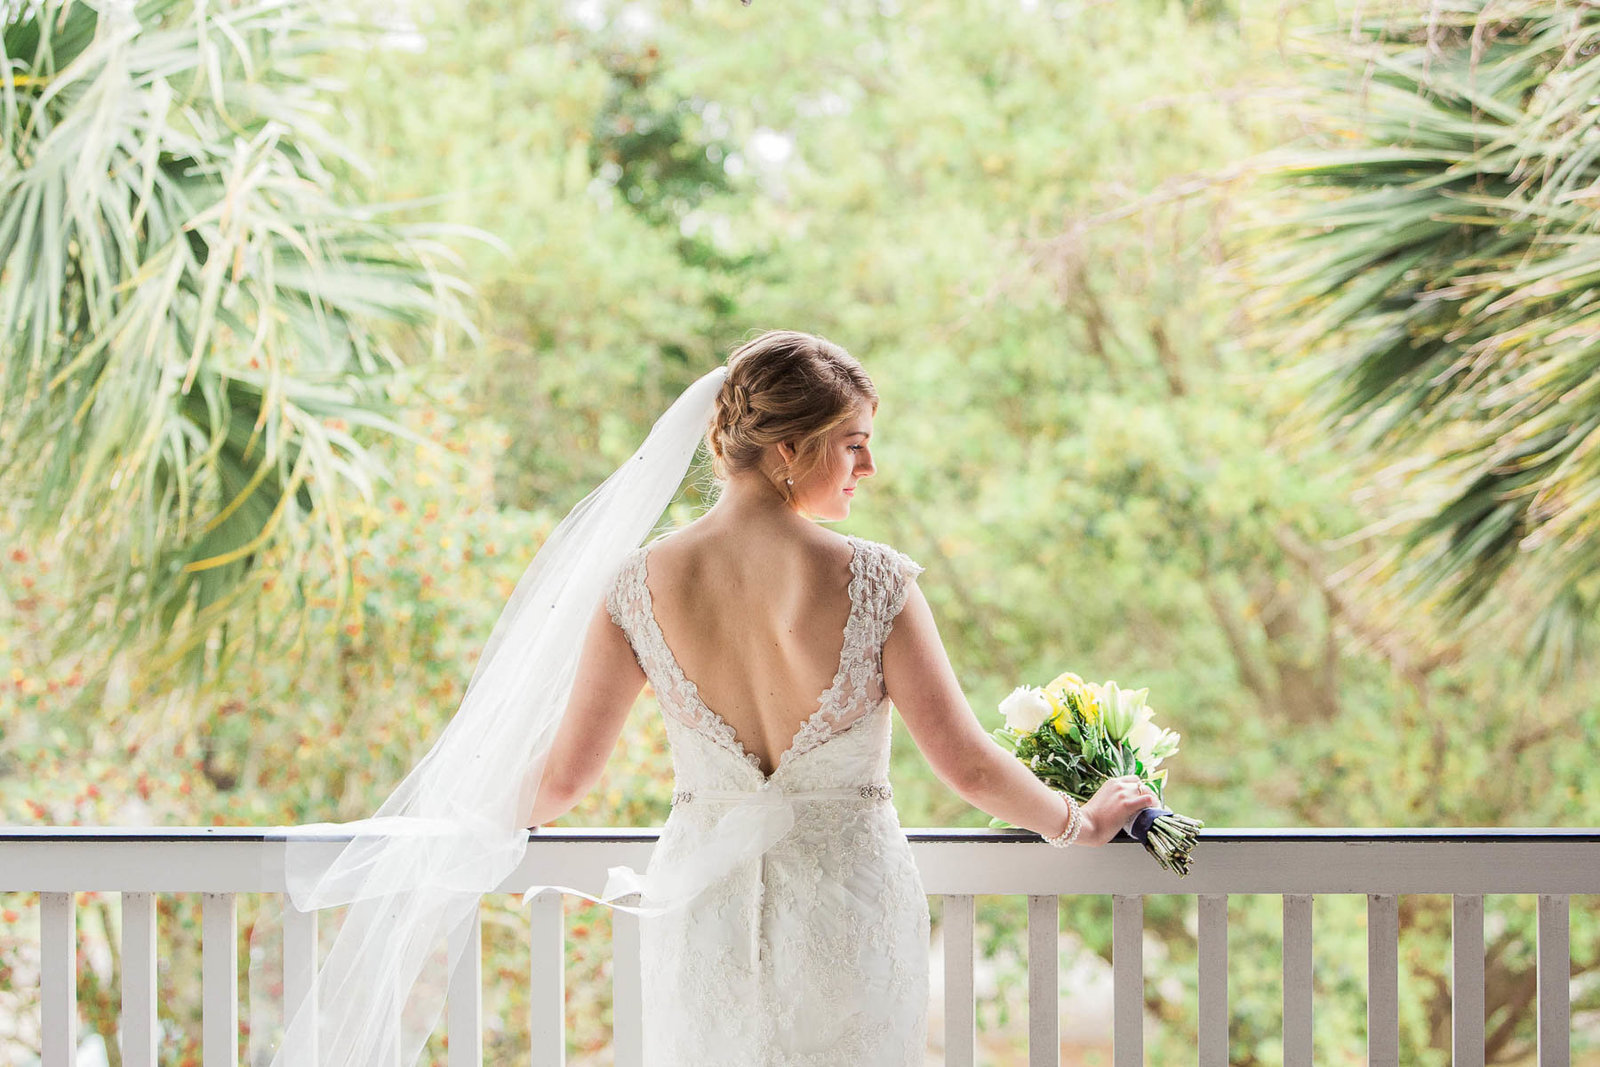 Bride leans on railing with veil blowing, Alhambra Hall, Charleston, South Carolina